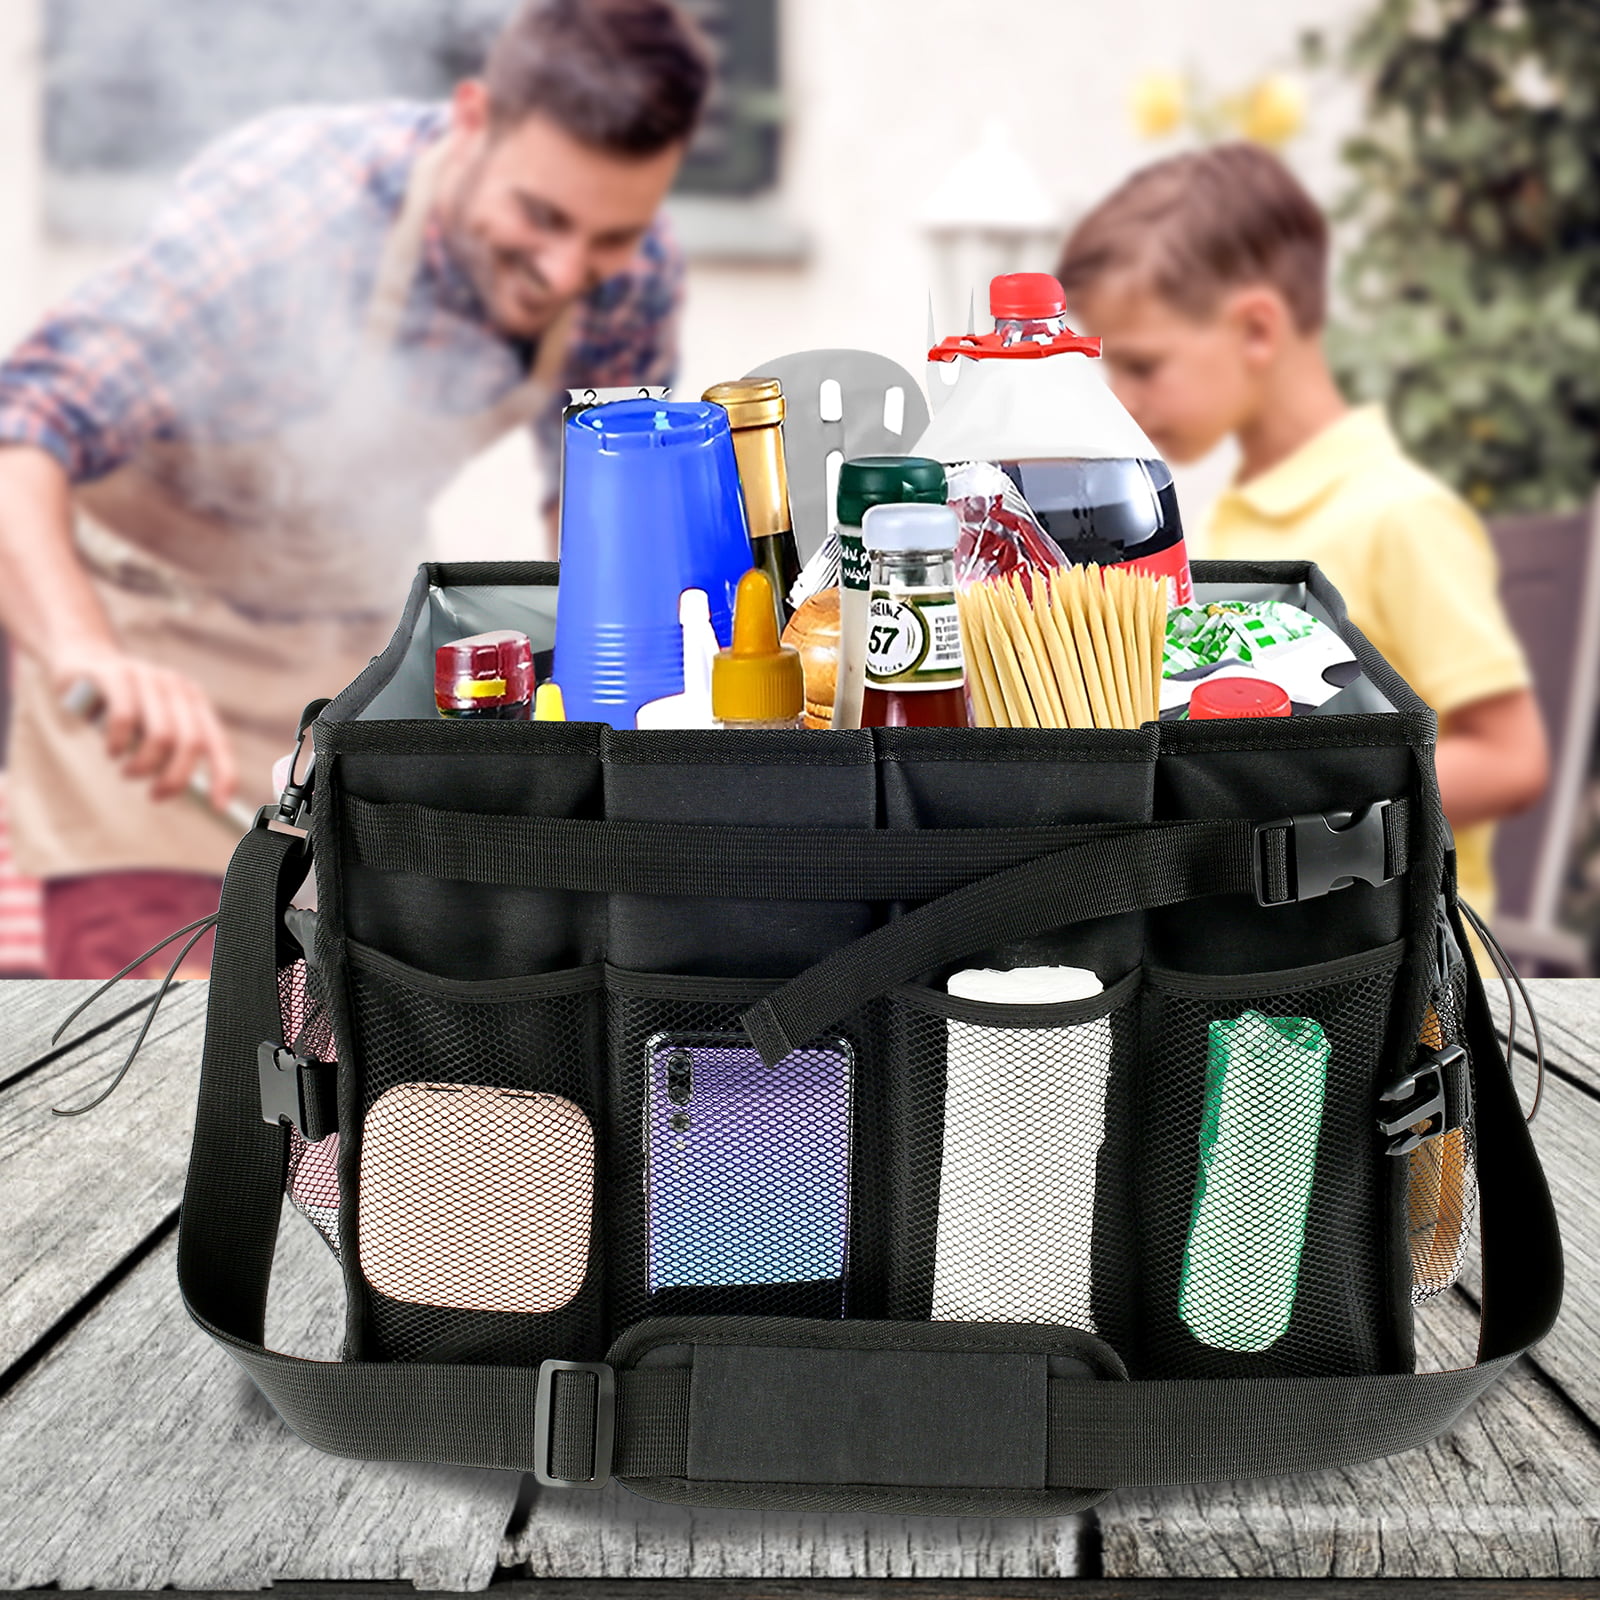 HULISEN Grill Caddy Large Backpack, BBQ Caddy with Paper Towel Holder,  Barbecue Utensil Caddy with Condiment Pocket, Collapsible Picnic Basket  Camping Gear Must Haves for Outdoor/Indoor Storing Items, Camping, Travel,  Car, Utensil